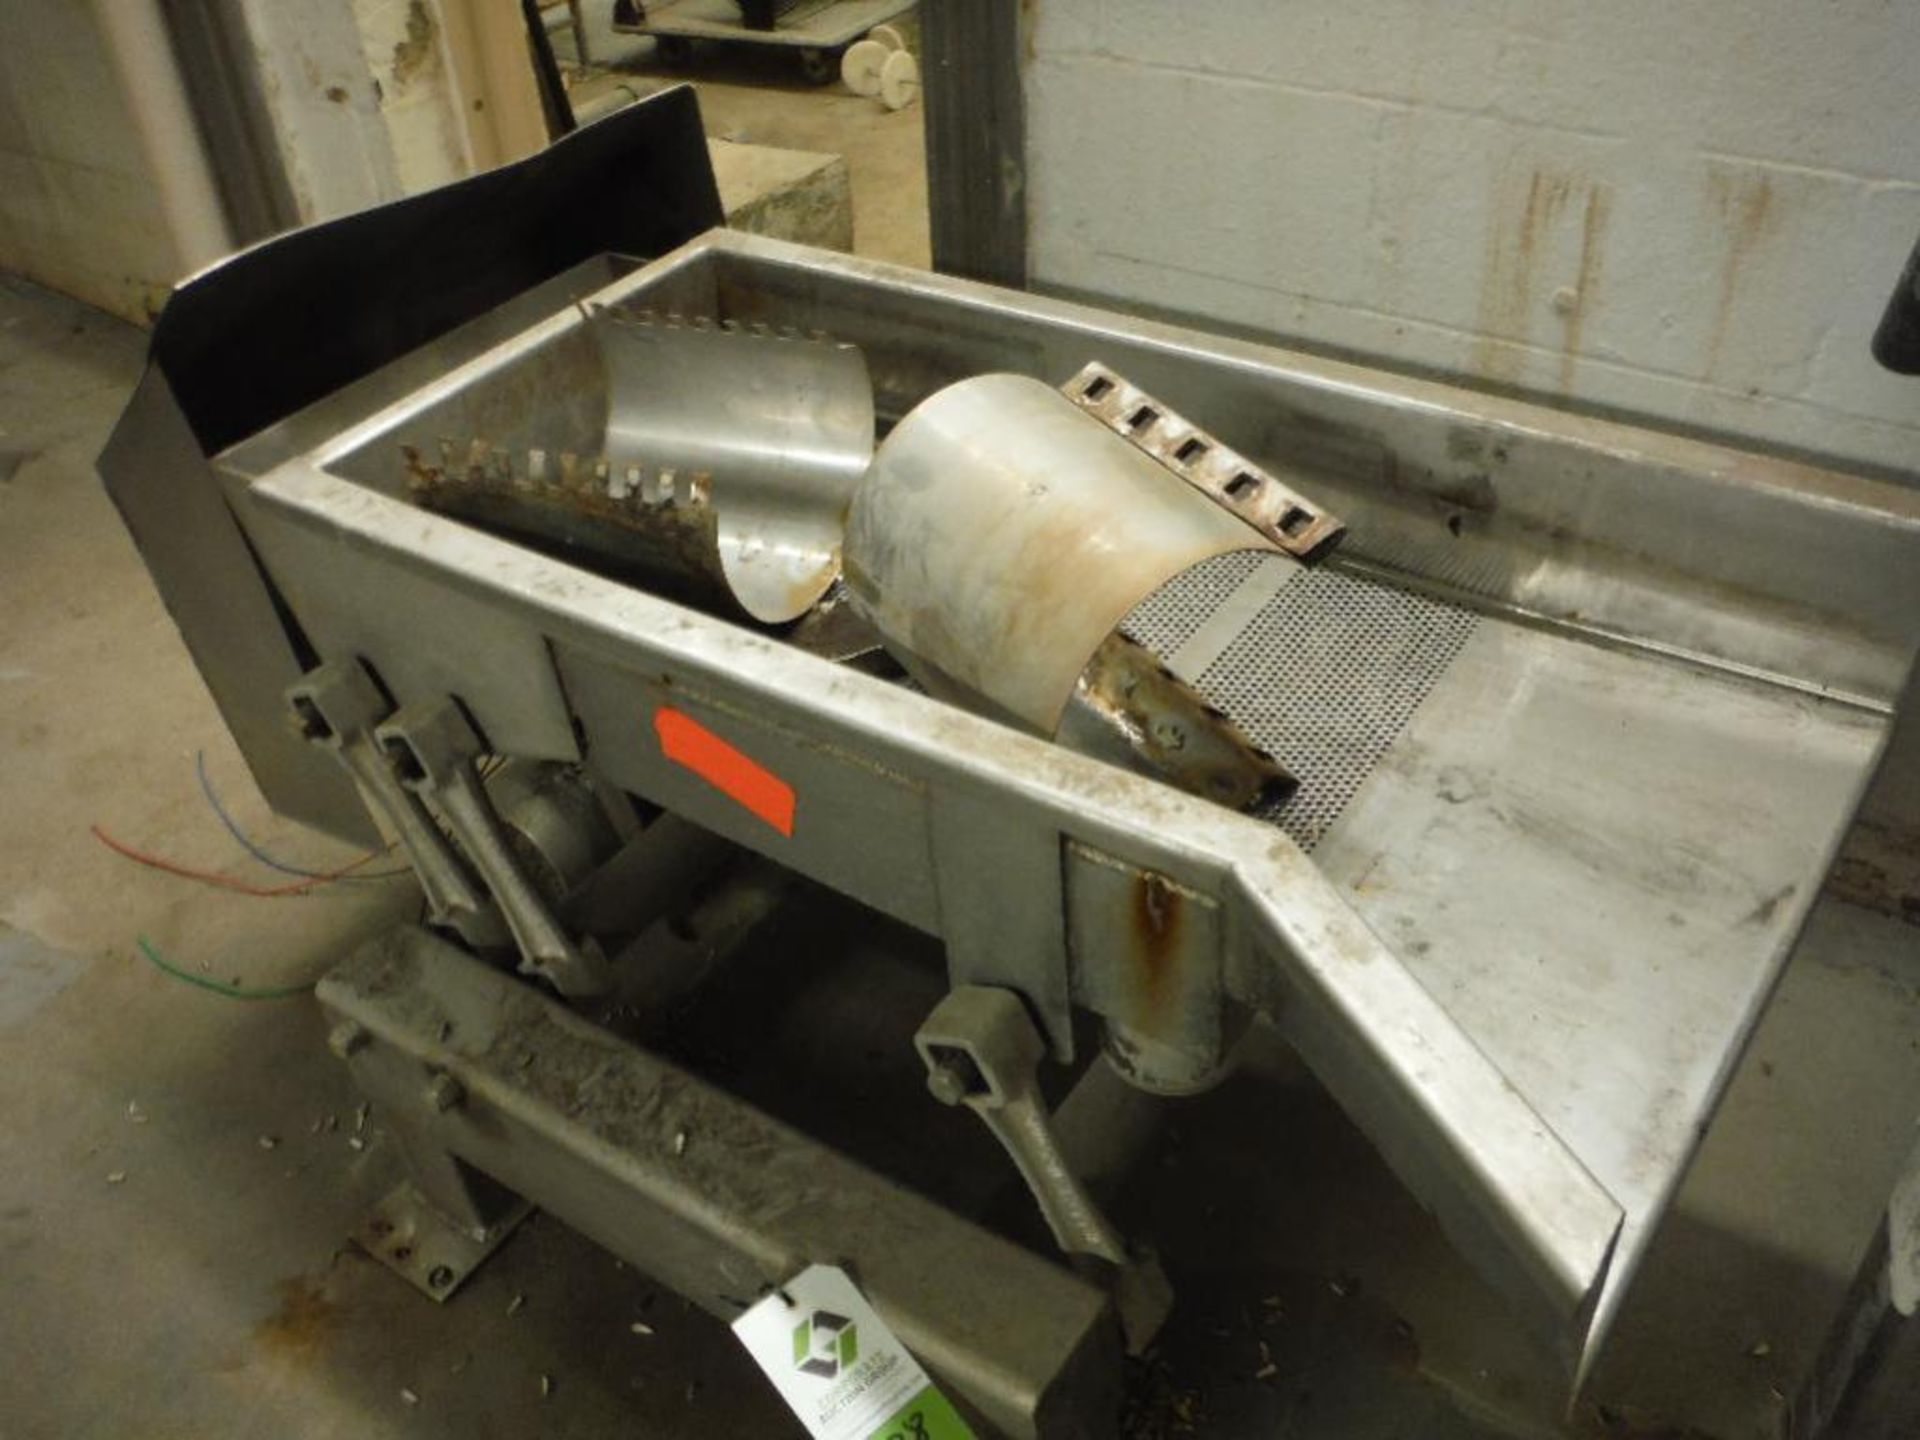 SS vibratory conveyor, 40 in. x 18 in. Rigging Fee: $150